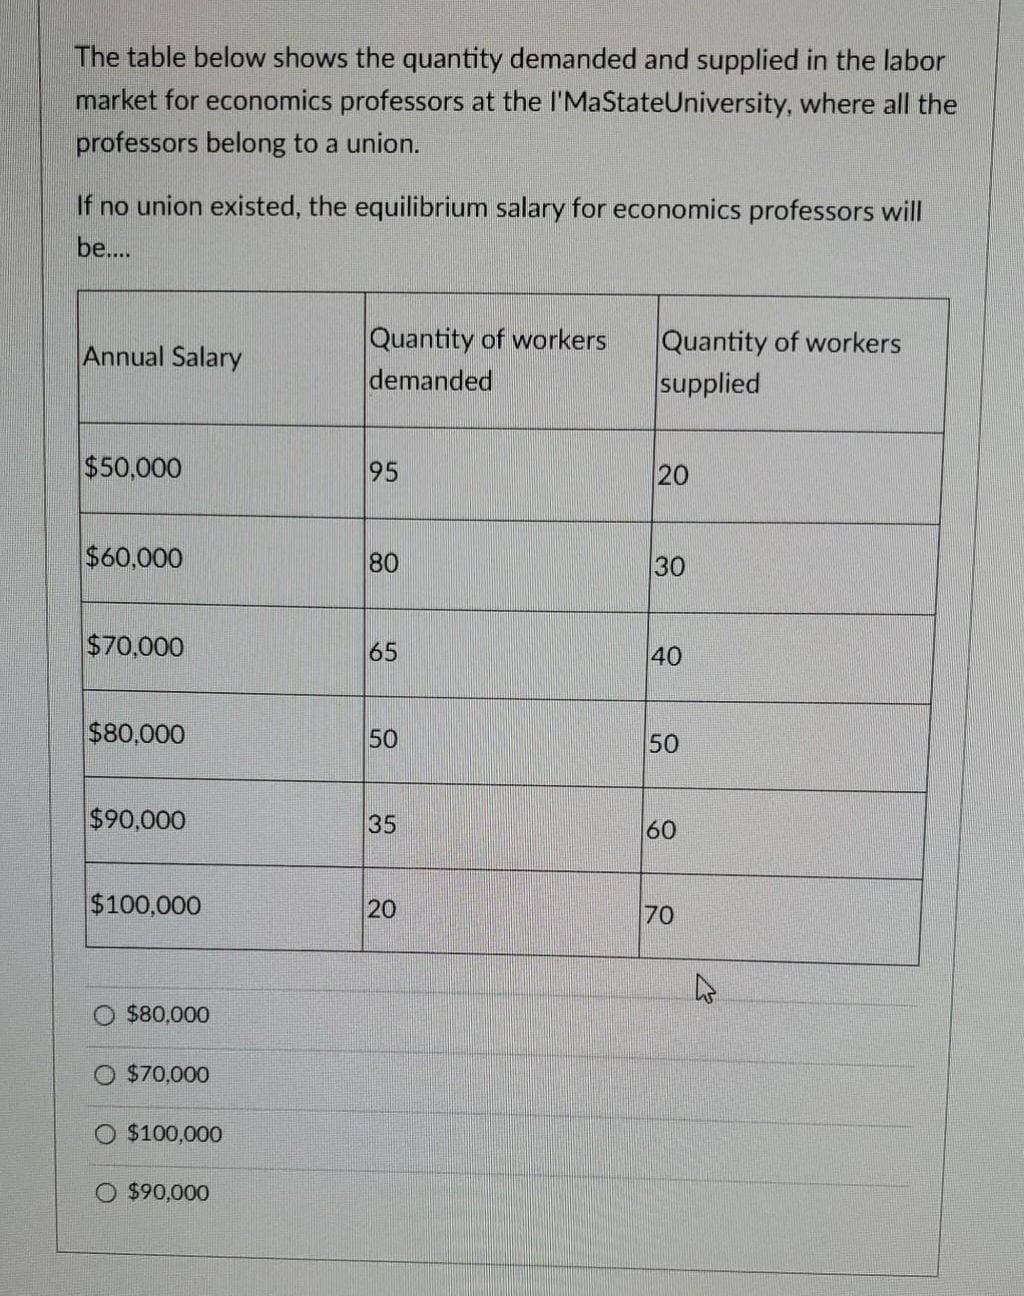 The table below shows the quantity demanded and supplied in the labor
market for economics professors at the l'MaState University, where all the
professors belong to a union.
If no union existed, the equilibrium salary for economics professors will
be....
Annual Salary
$50,000
$60,000
$70,000
$80,000
$90,000
$100,000
$80,000
$70,000
O $100,000
$90,000
Quantity of workers
demanded
95
80
65
50
35
20
Quantity of workers
supplied
20
30
40
50
60
70